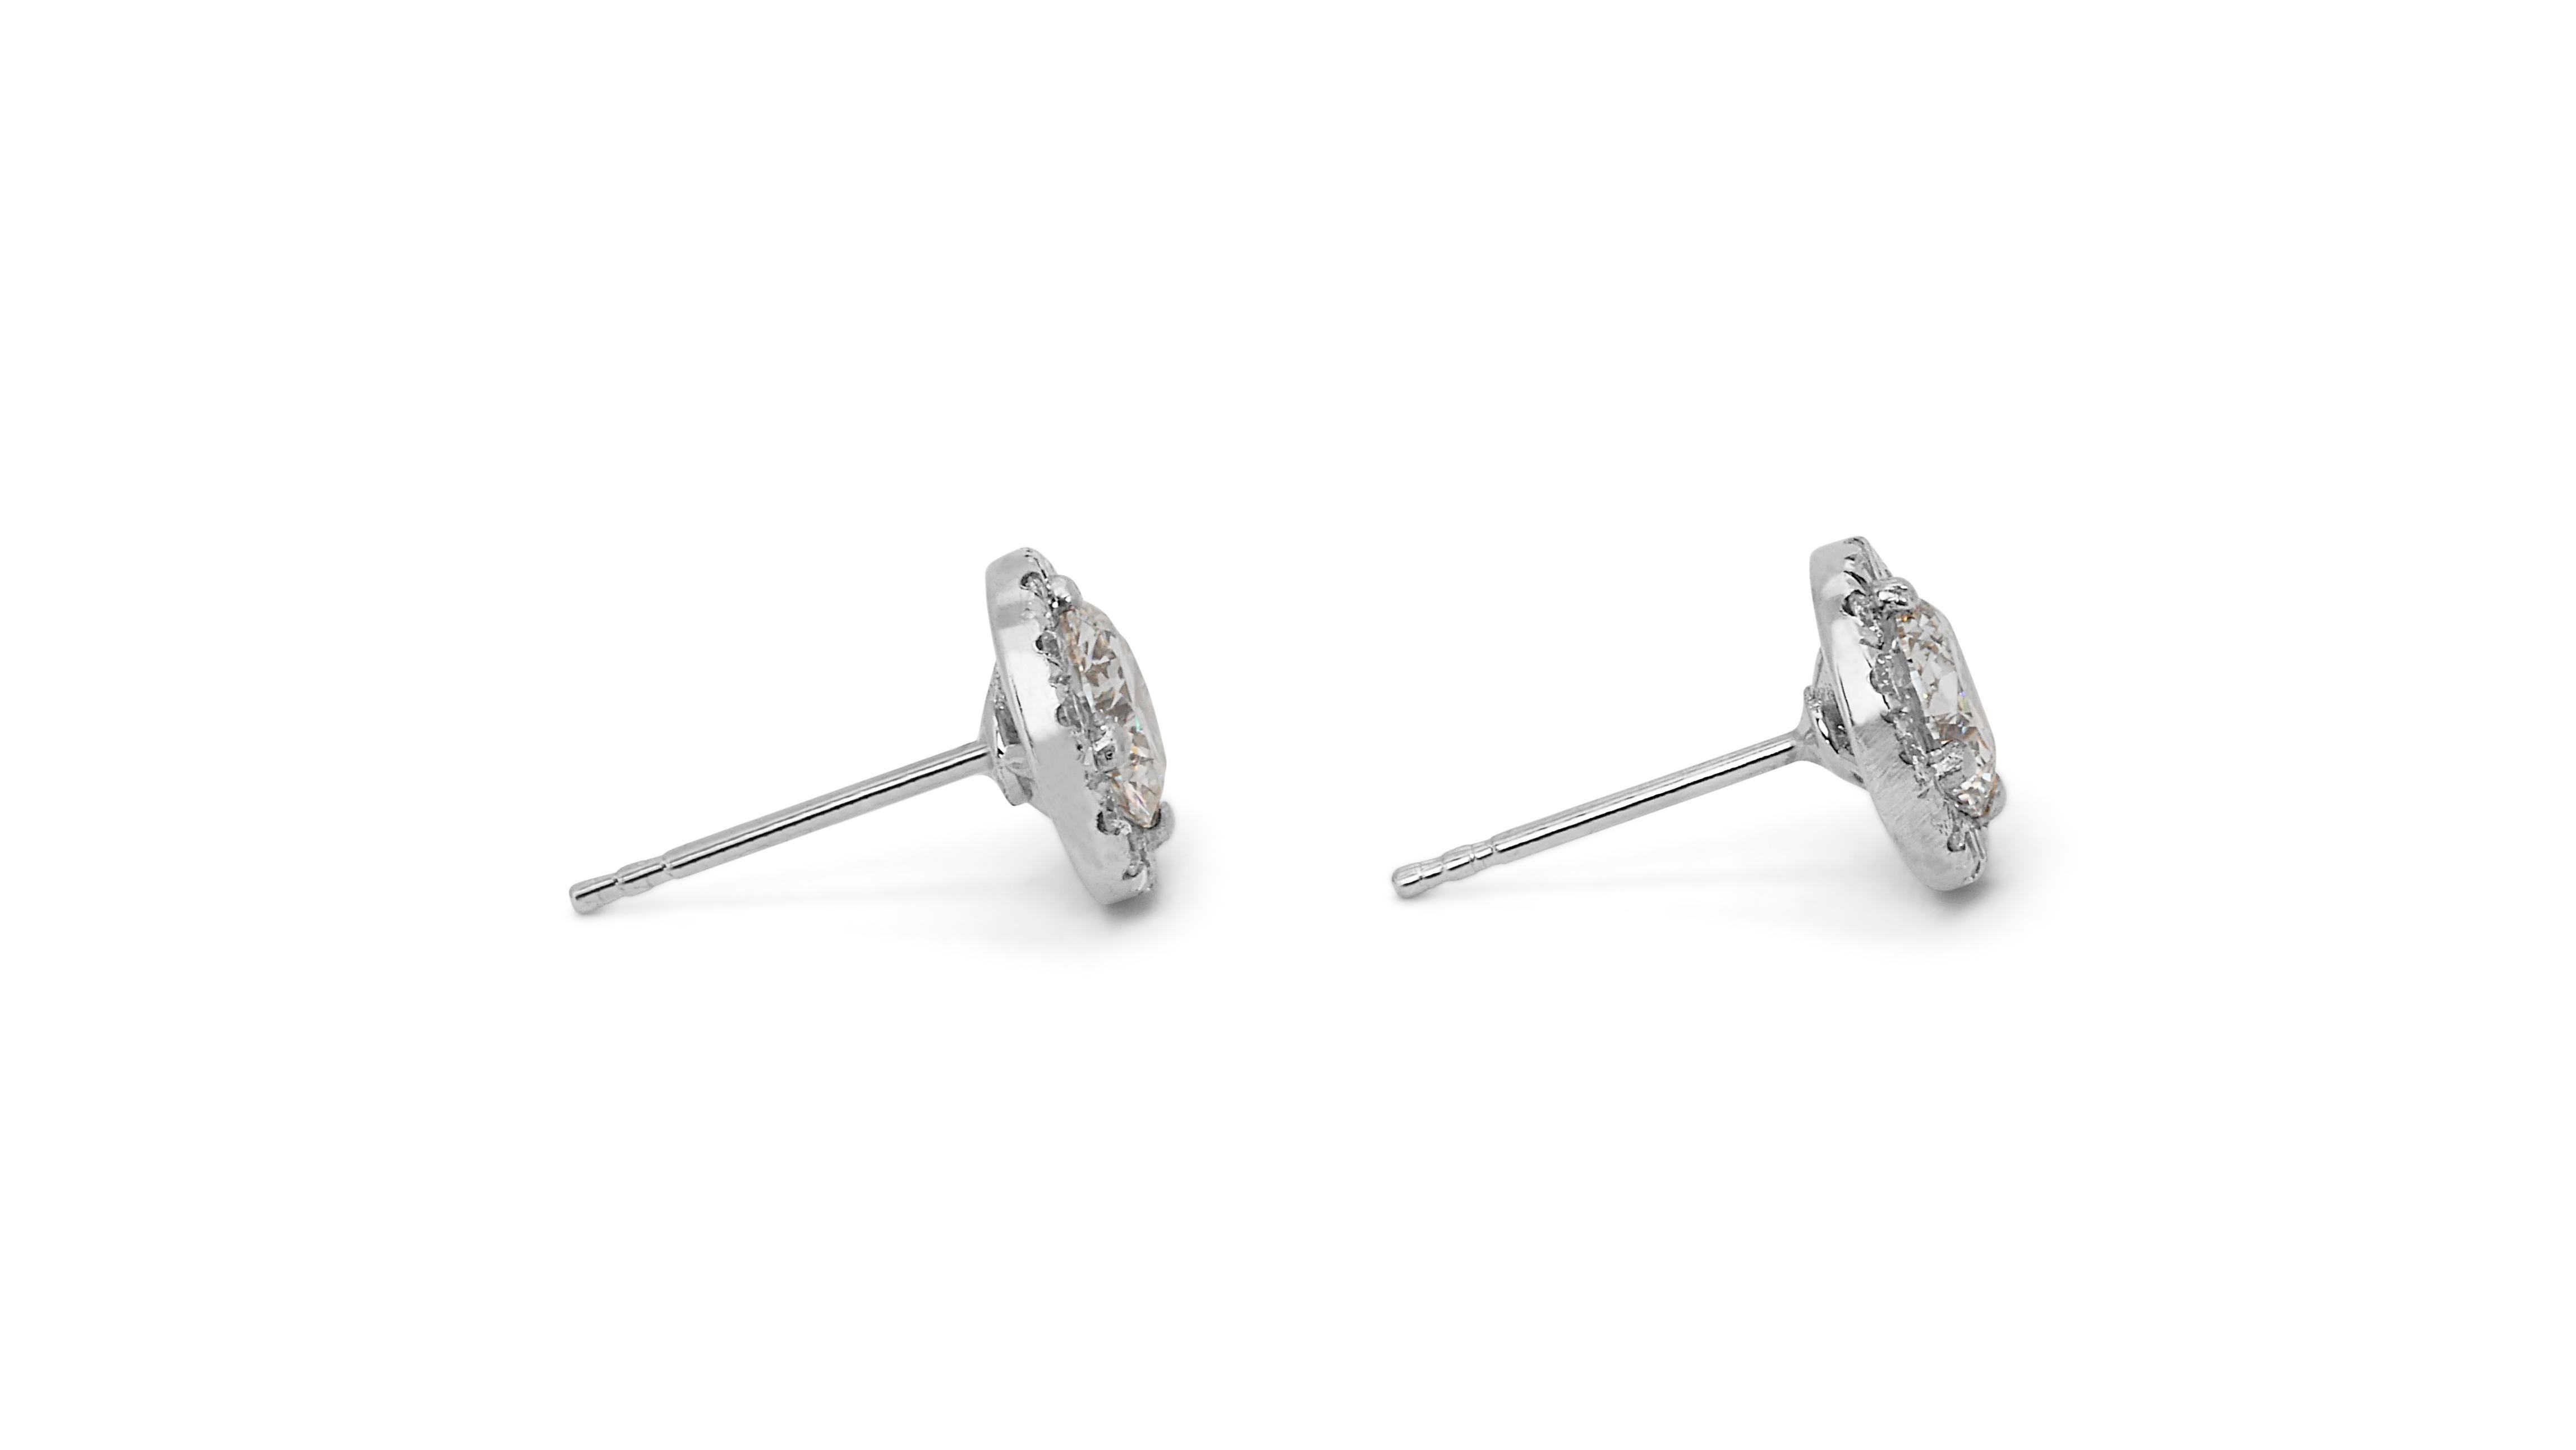 Lustrous 2.57ct Diamond Stud Earrings in 18k White Gold - GIA Certified For Sale 3